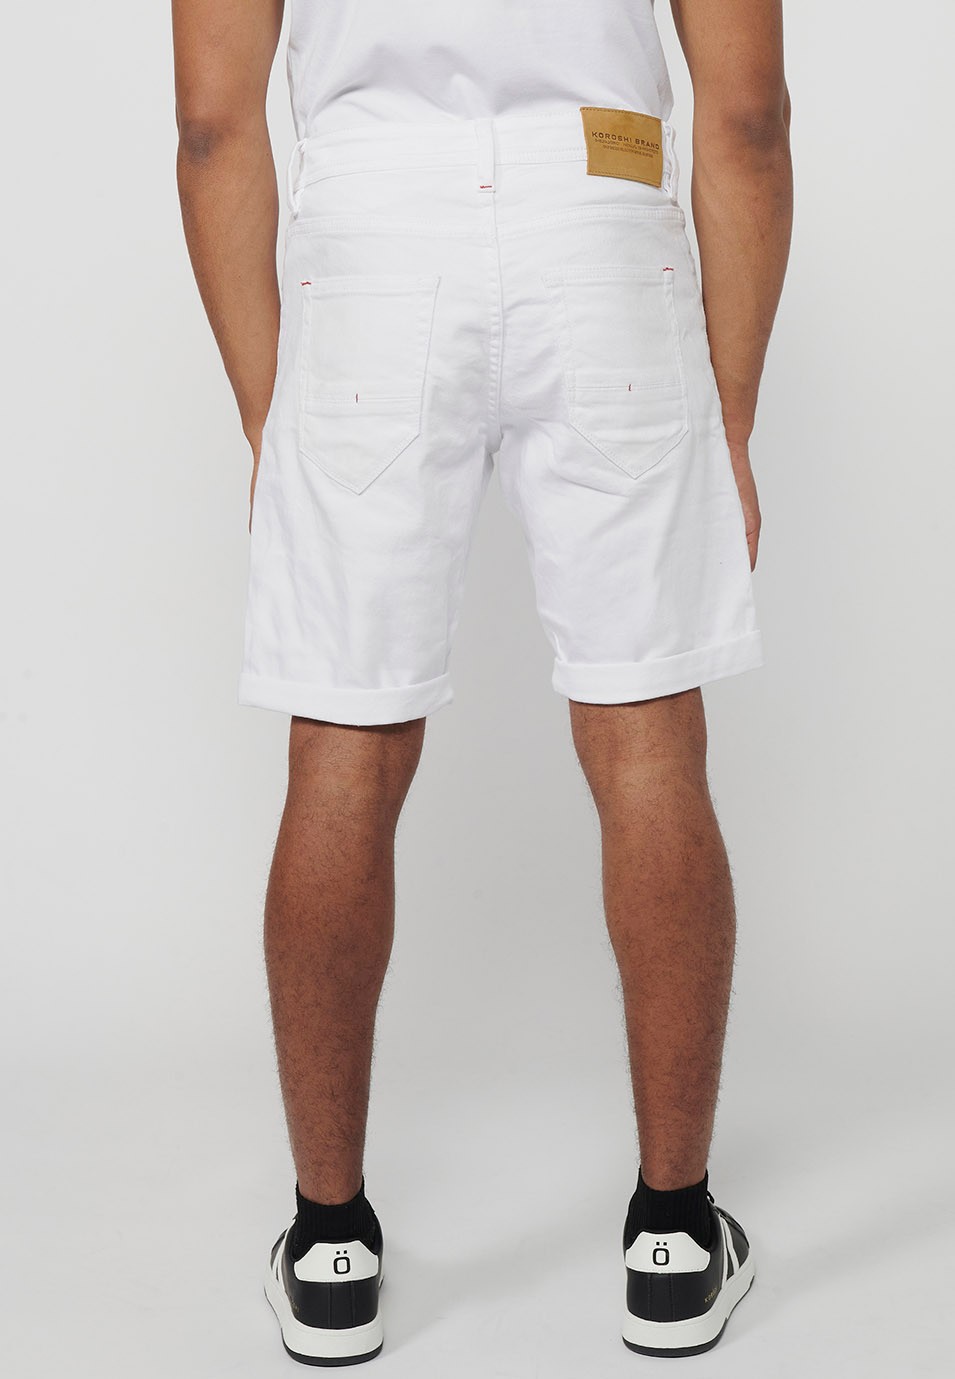 Denim Bermuda shorts with turn-up finish and front closure with zipper and button in White for Men 1